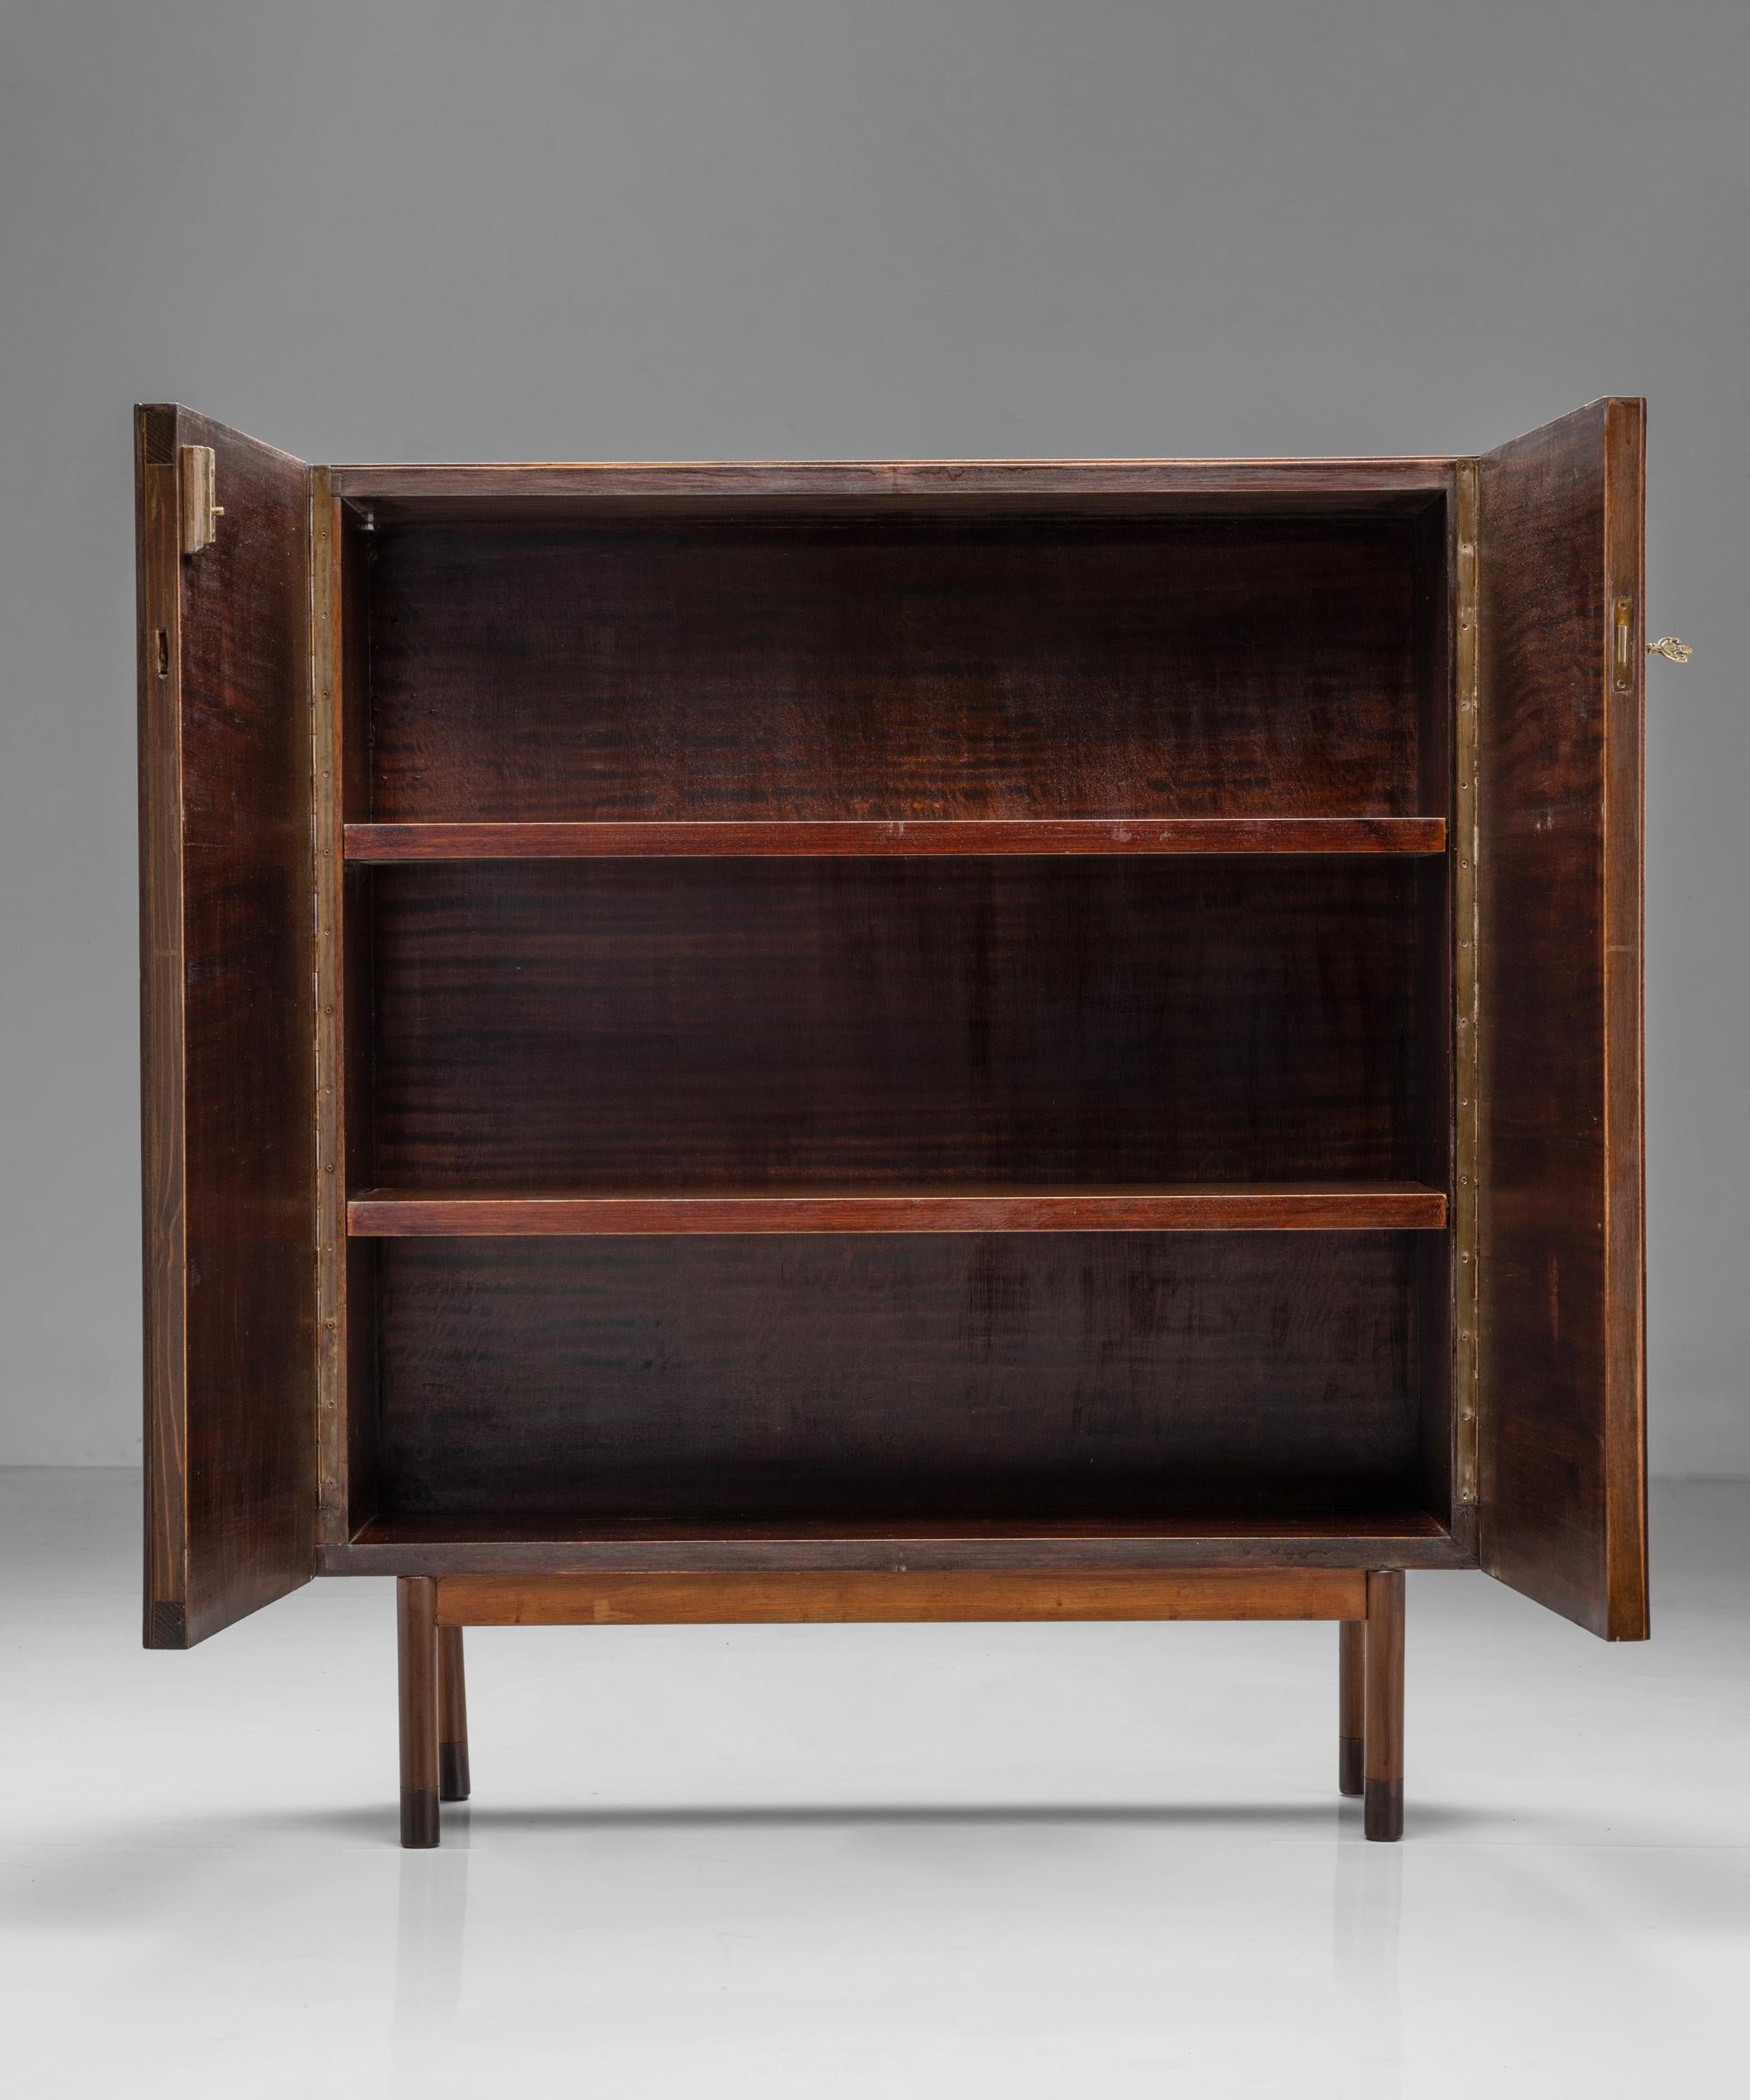 Slatted mahogany buffet

Italy Circa 1950

Finely crafted cabinet in mahogany, with two interior shelves and original brass hardware.

Measures: 38.5” W x 12.5” D x 45” H.